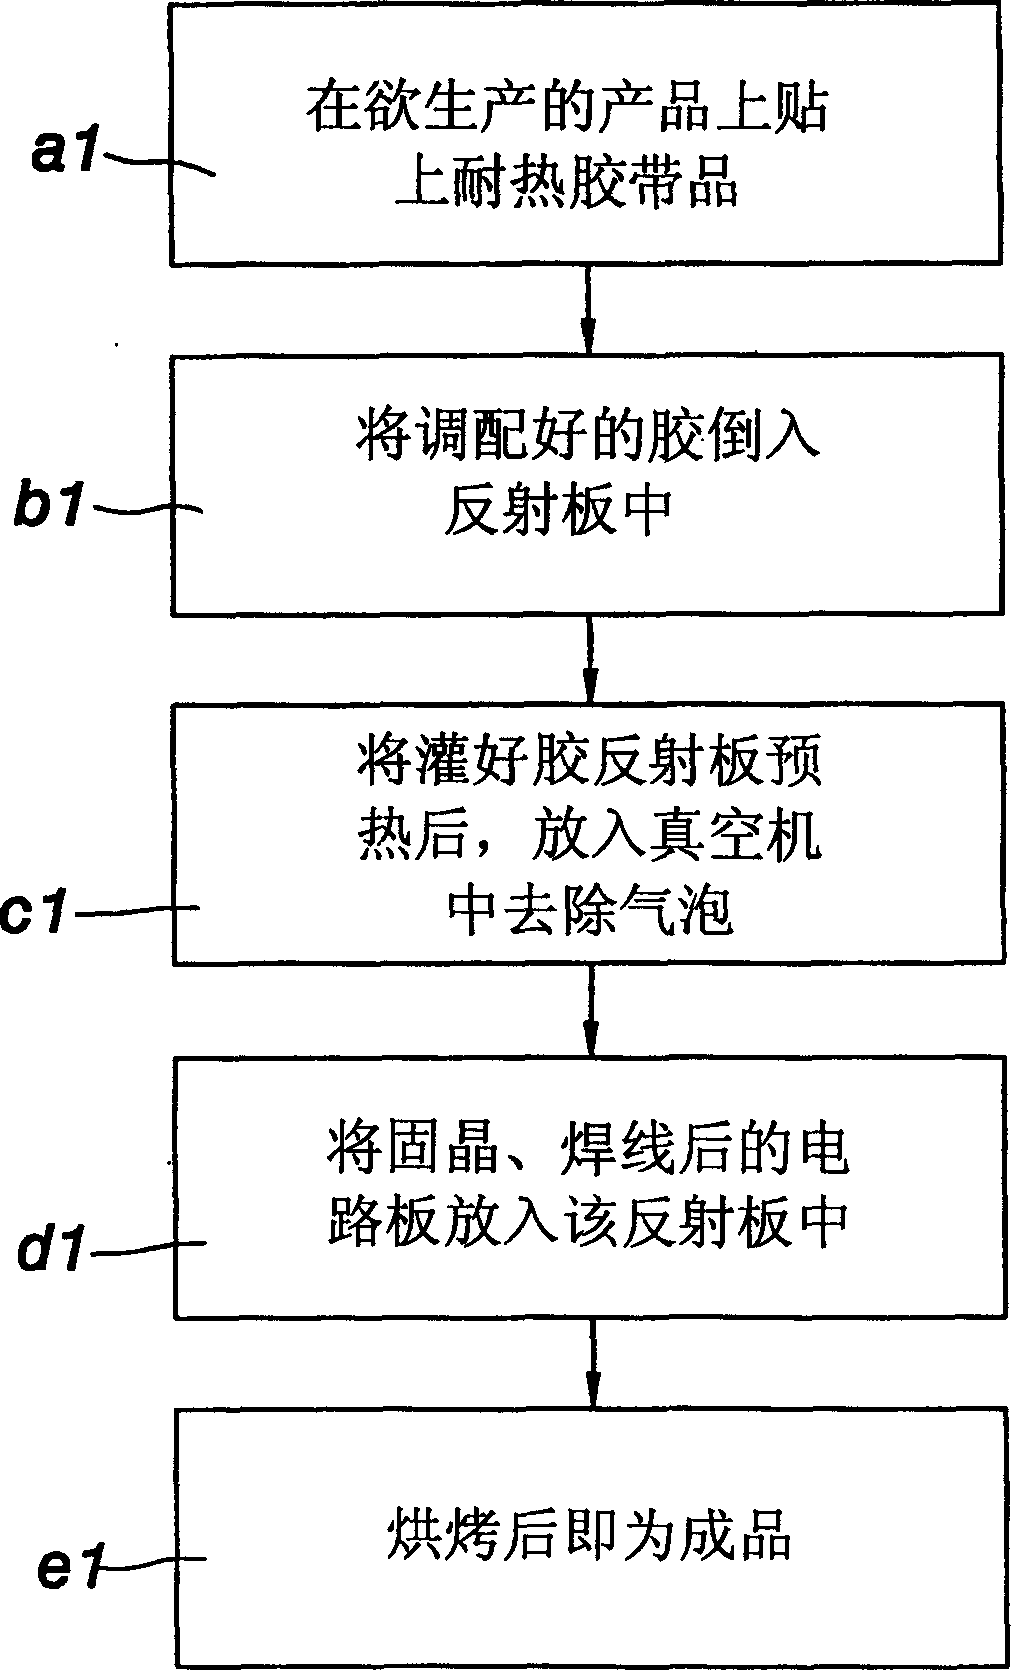 Process for producing color display